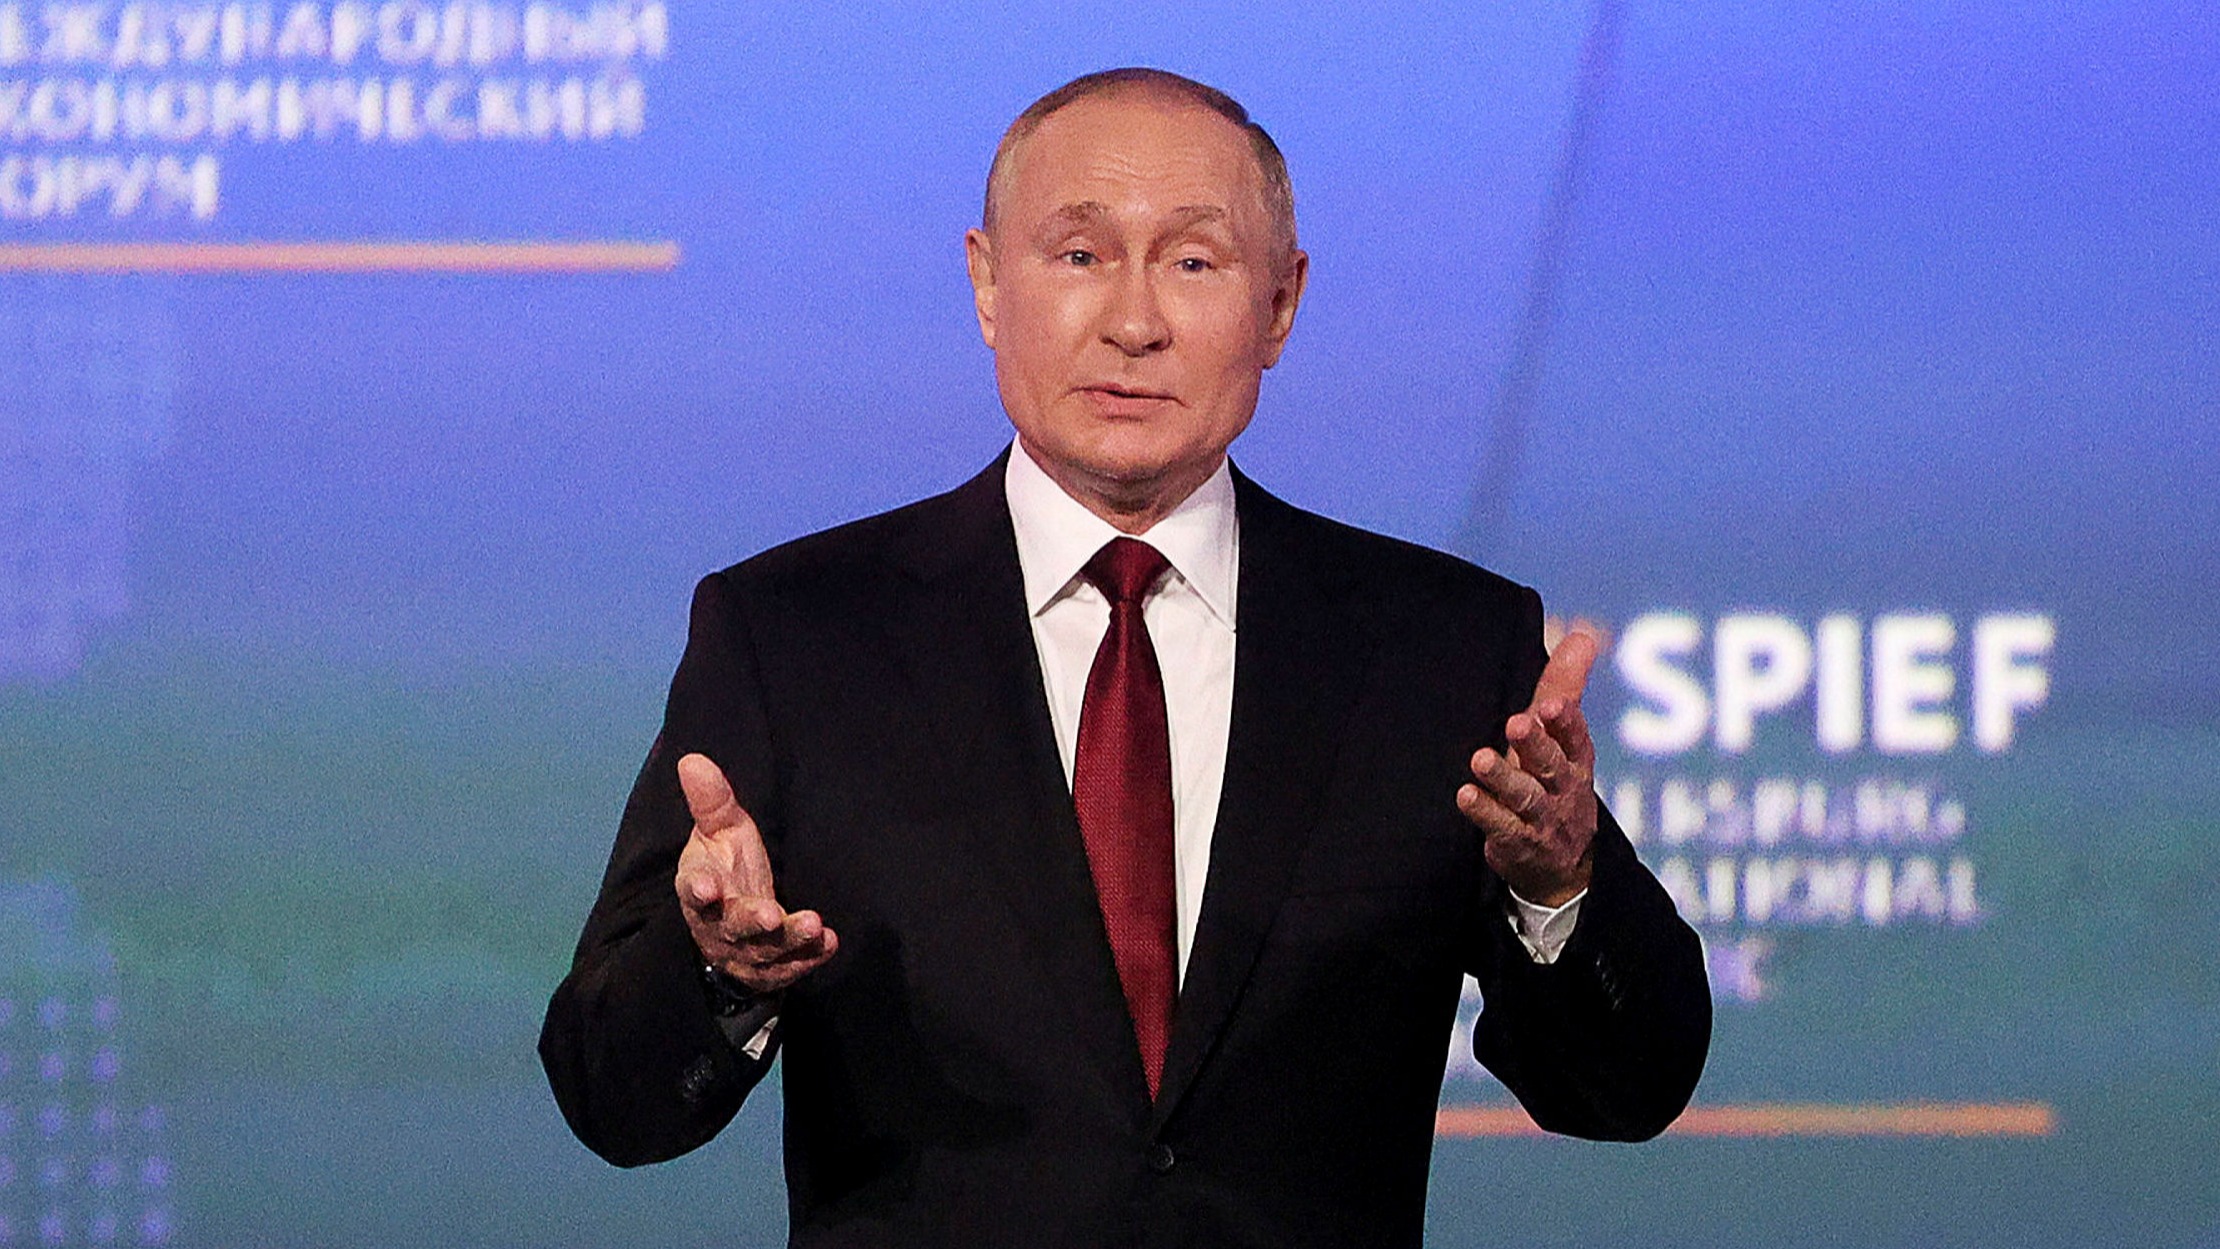 Putin claims Russia has weathered sanctions better than Europe | Financial Times